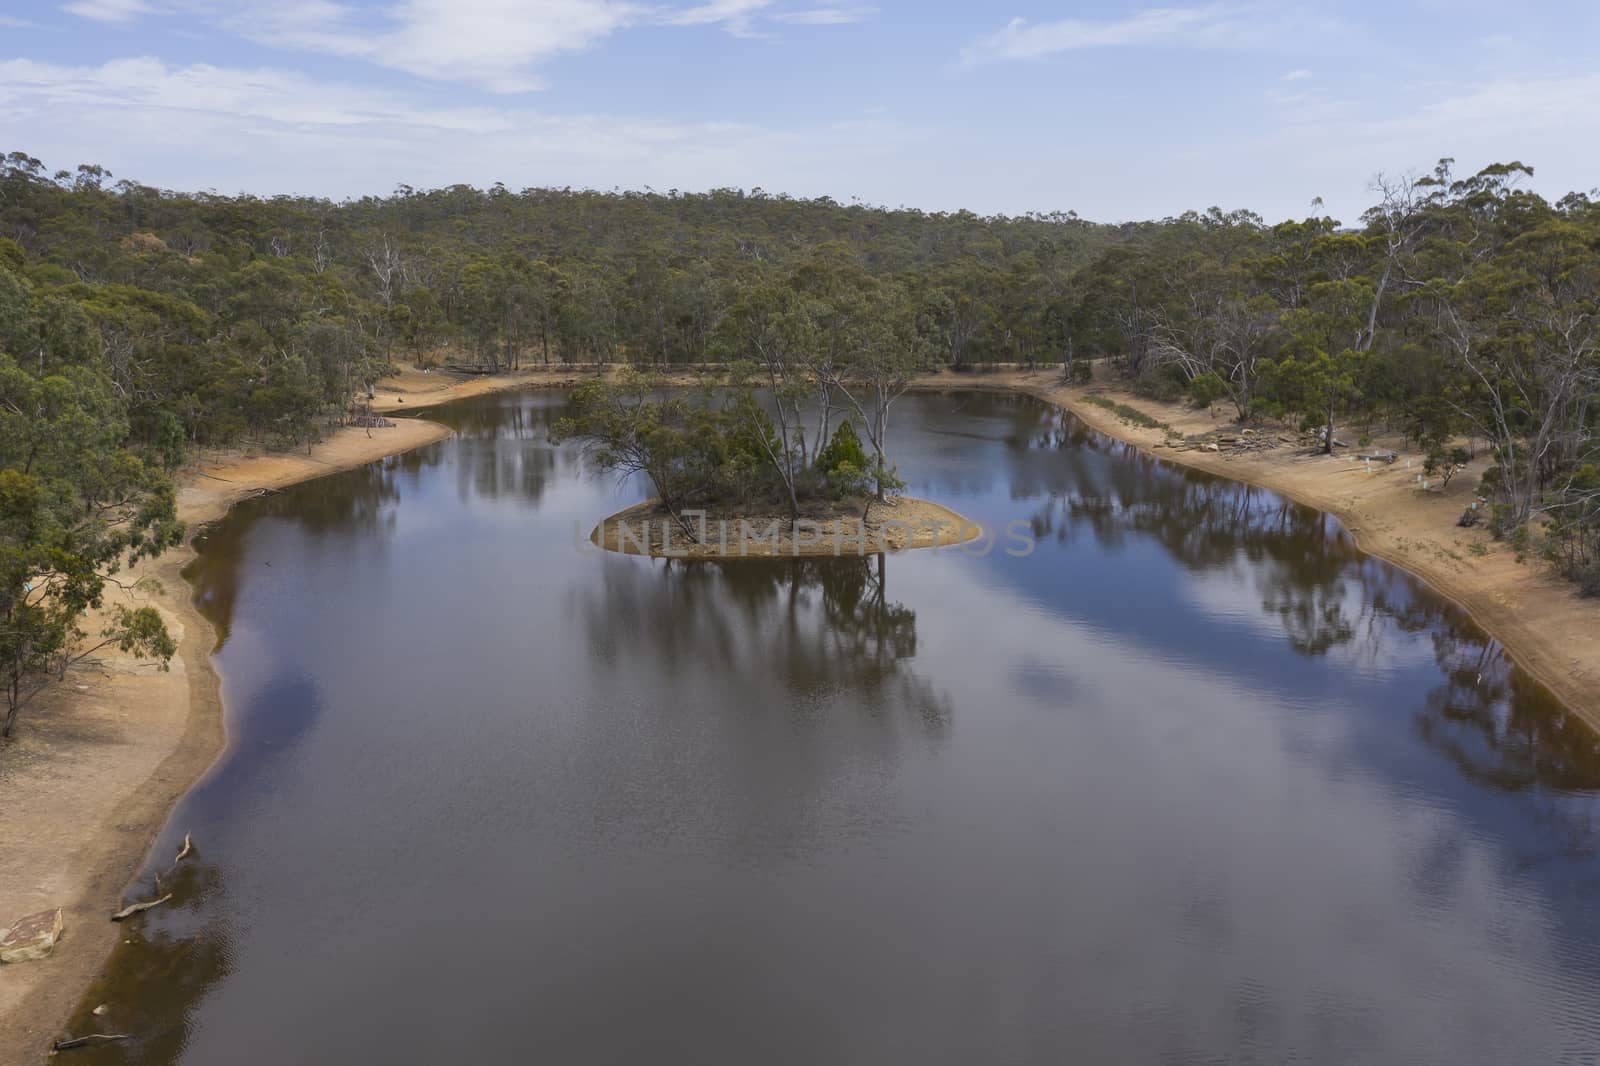 Aerial view of a drought affected water reservoir in regional Australia by WittkePhotos